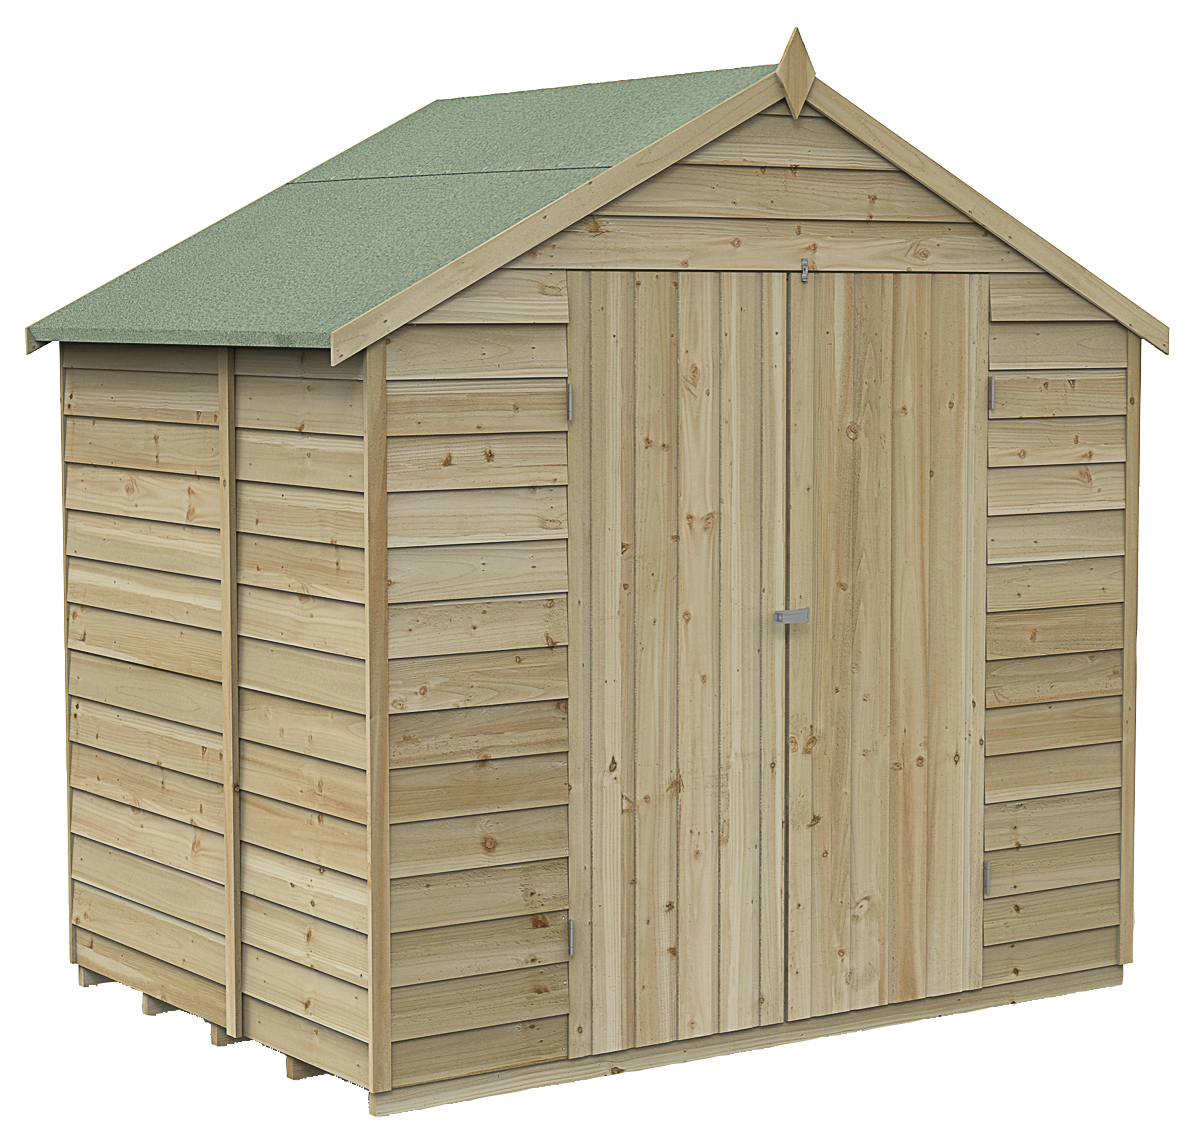 Image of Forest Garden 7 x 5ft 4Life Apex Overlap Pressure Treated Double Door Windowless Shed with Assembly